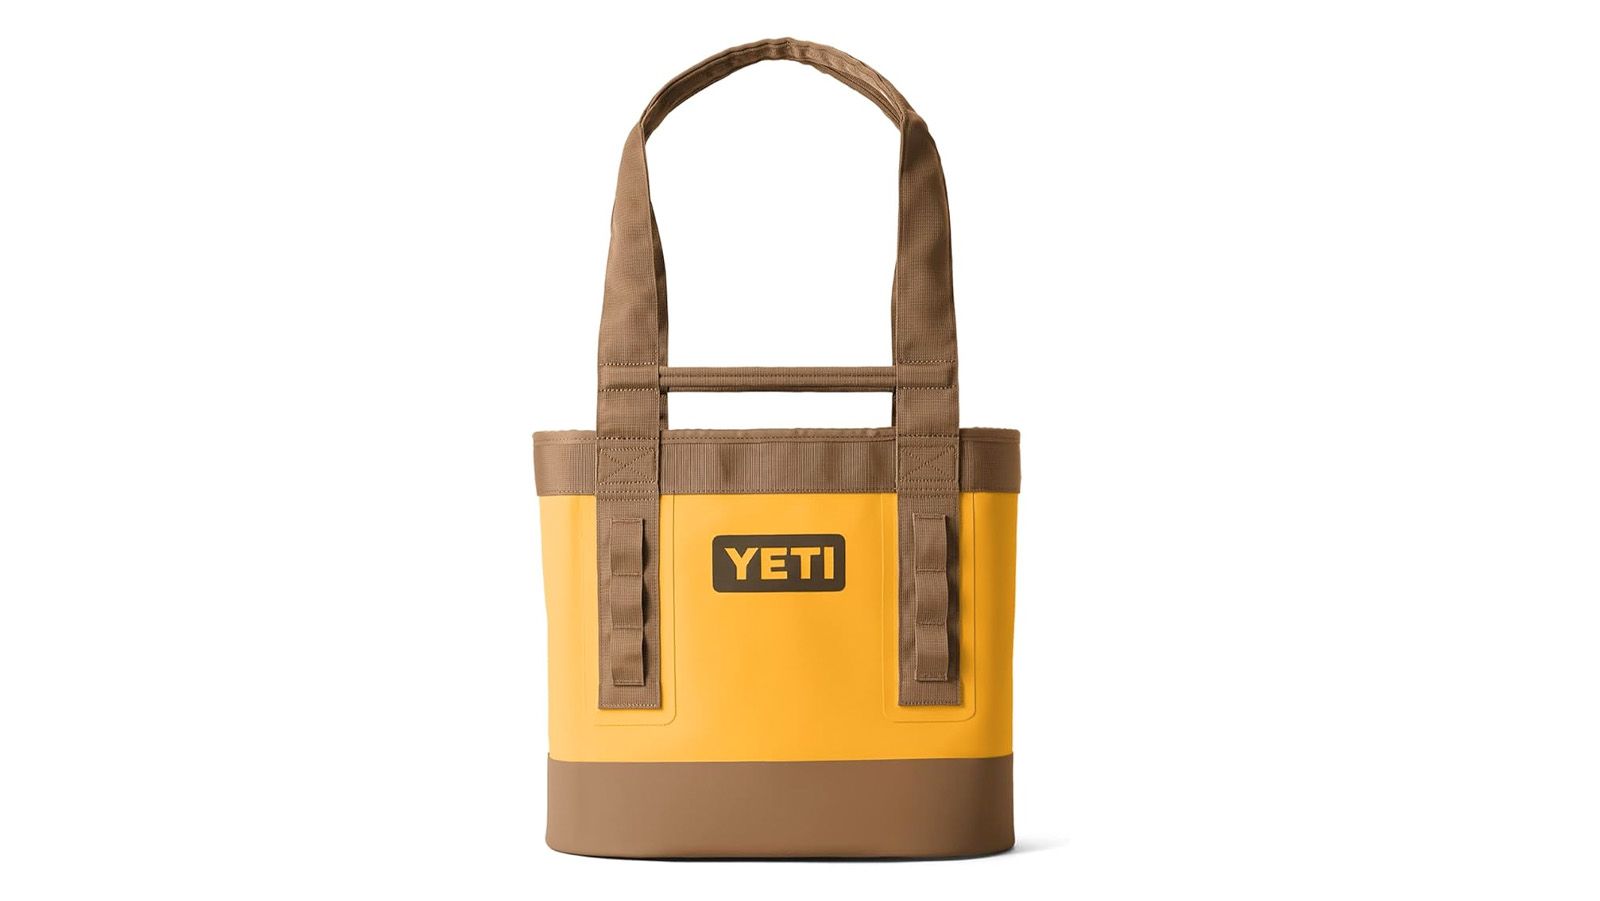 Black Friday YETI deals — 5 best sales to shop now on coolers and